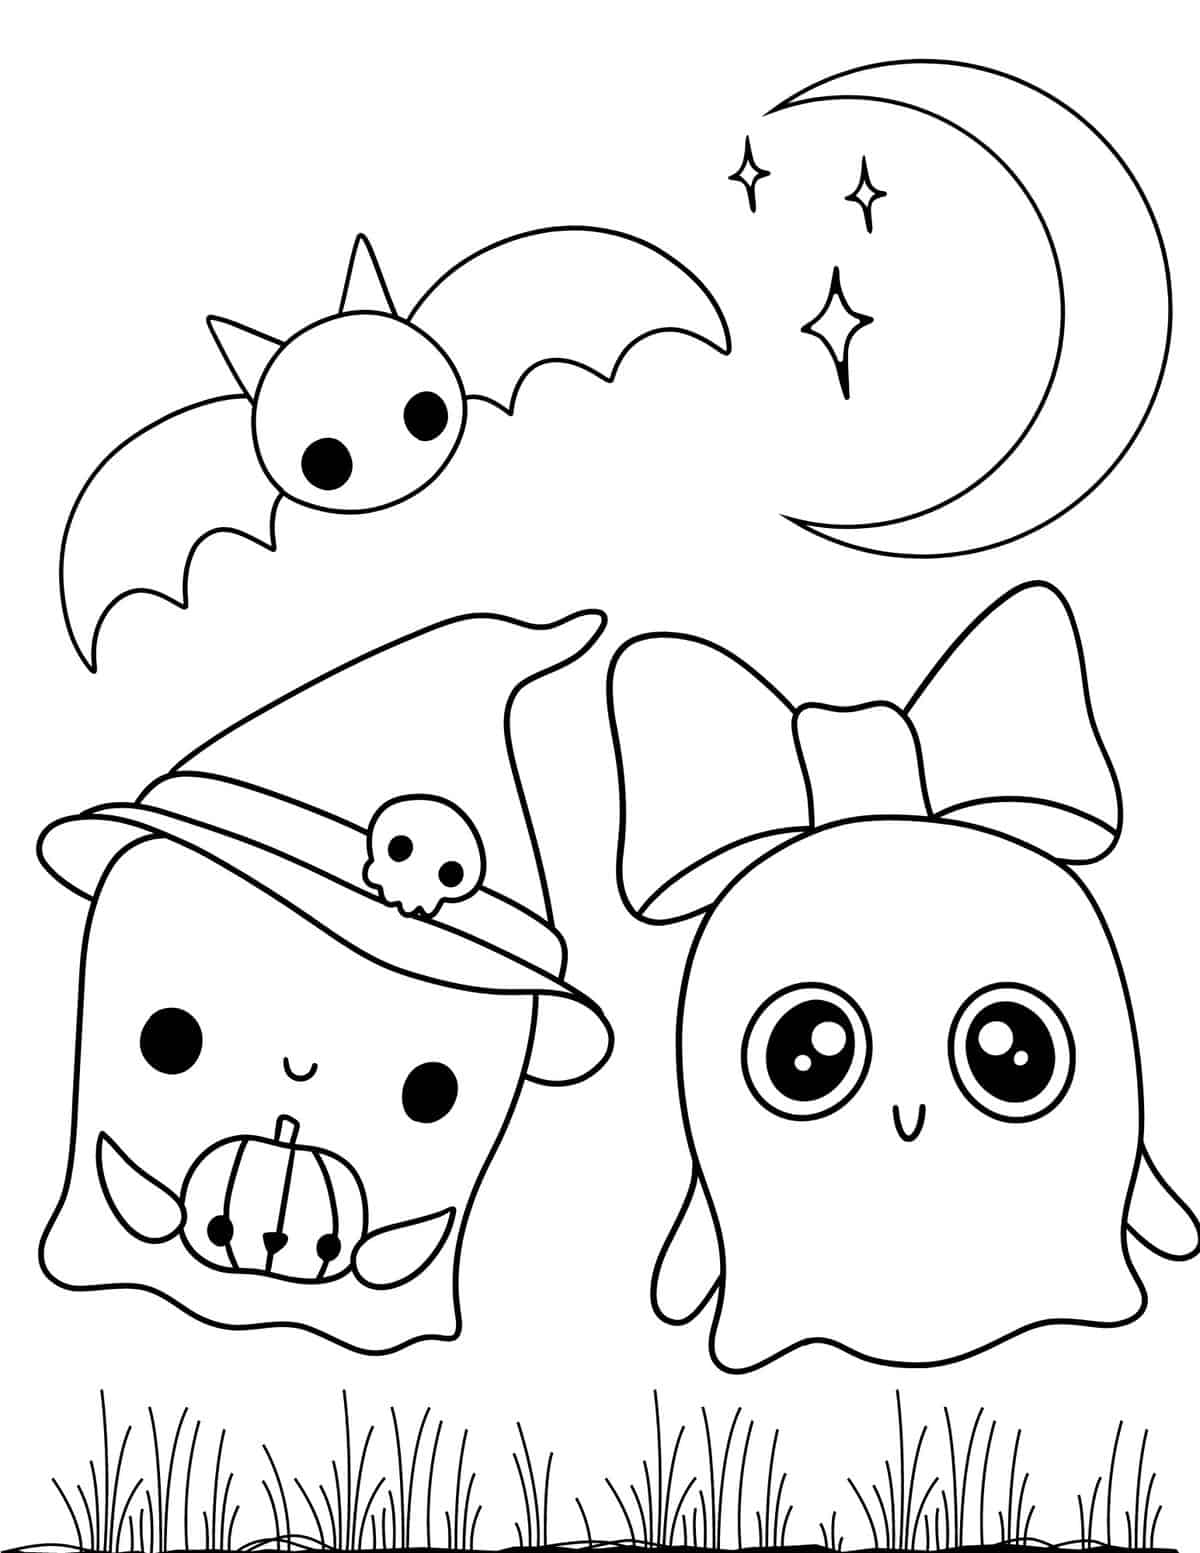 40 Free Halloween Coloring Pages for Kids and Adults - Prudent Penny Pincher